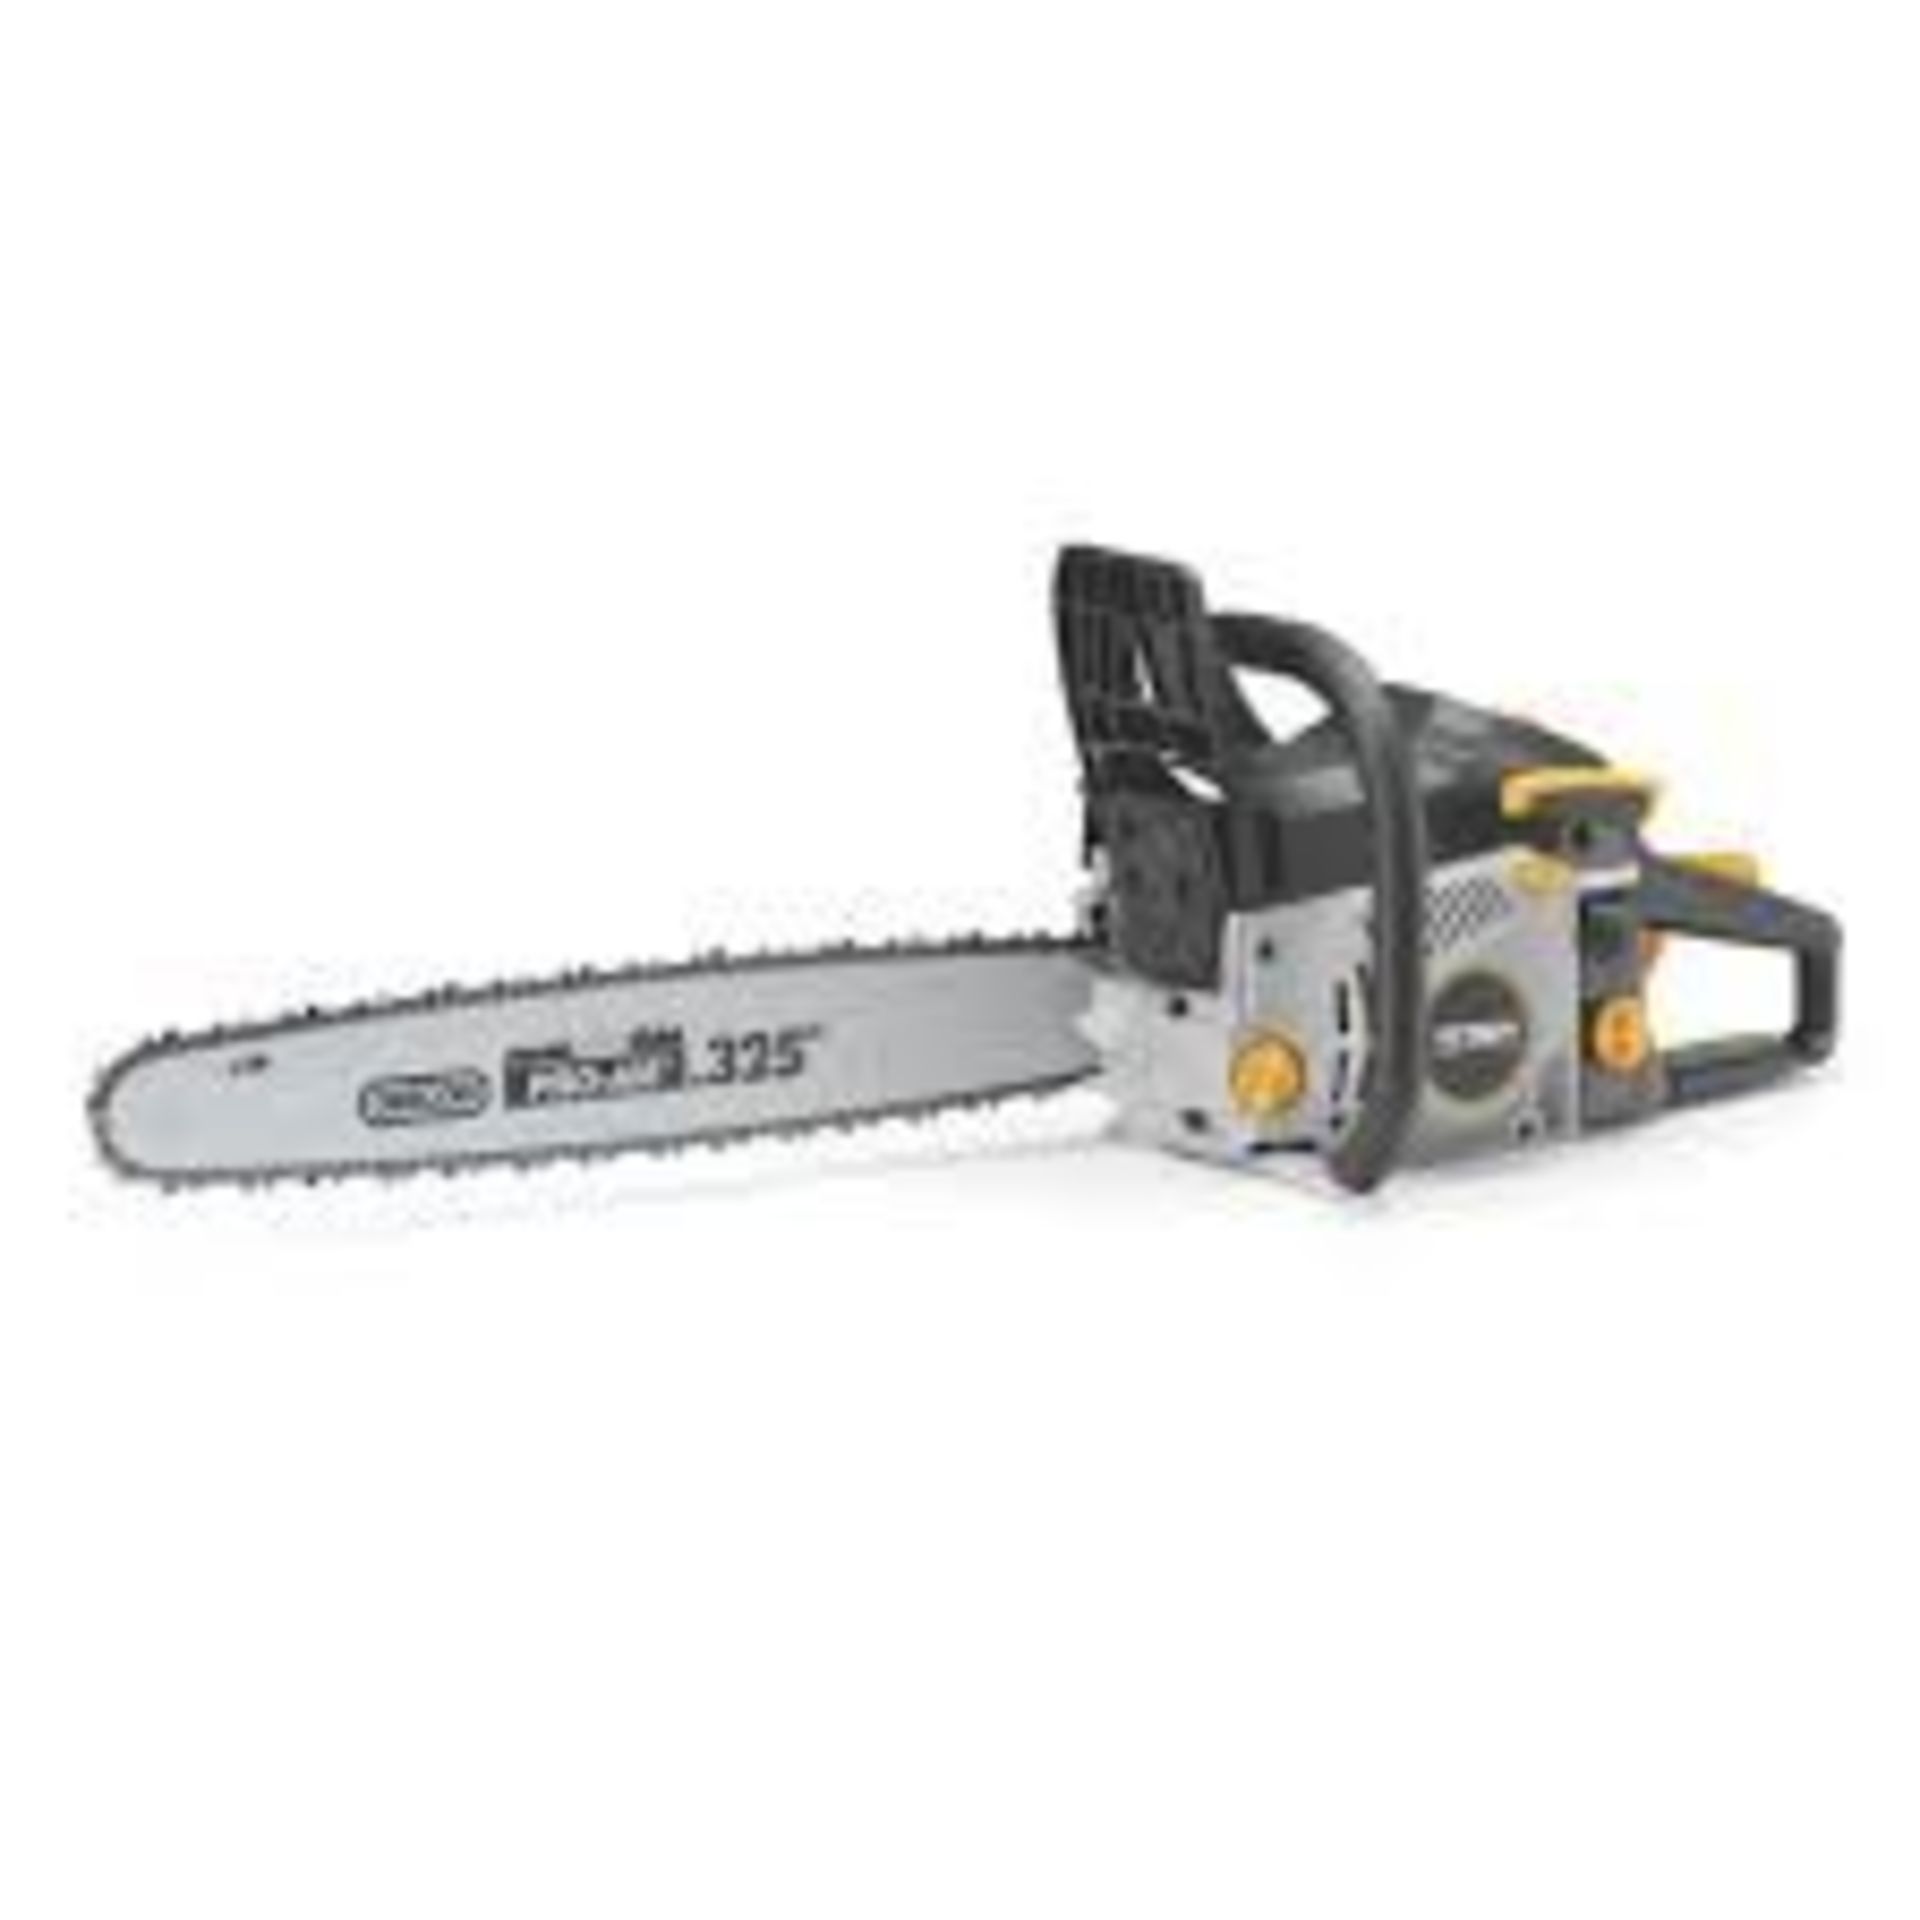 Titan TTCSP49 50cm 49.3cc Chainsaw. - PW. Powerful chainsaw with Easy-Start technology, reducing the